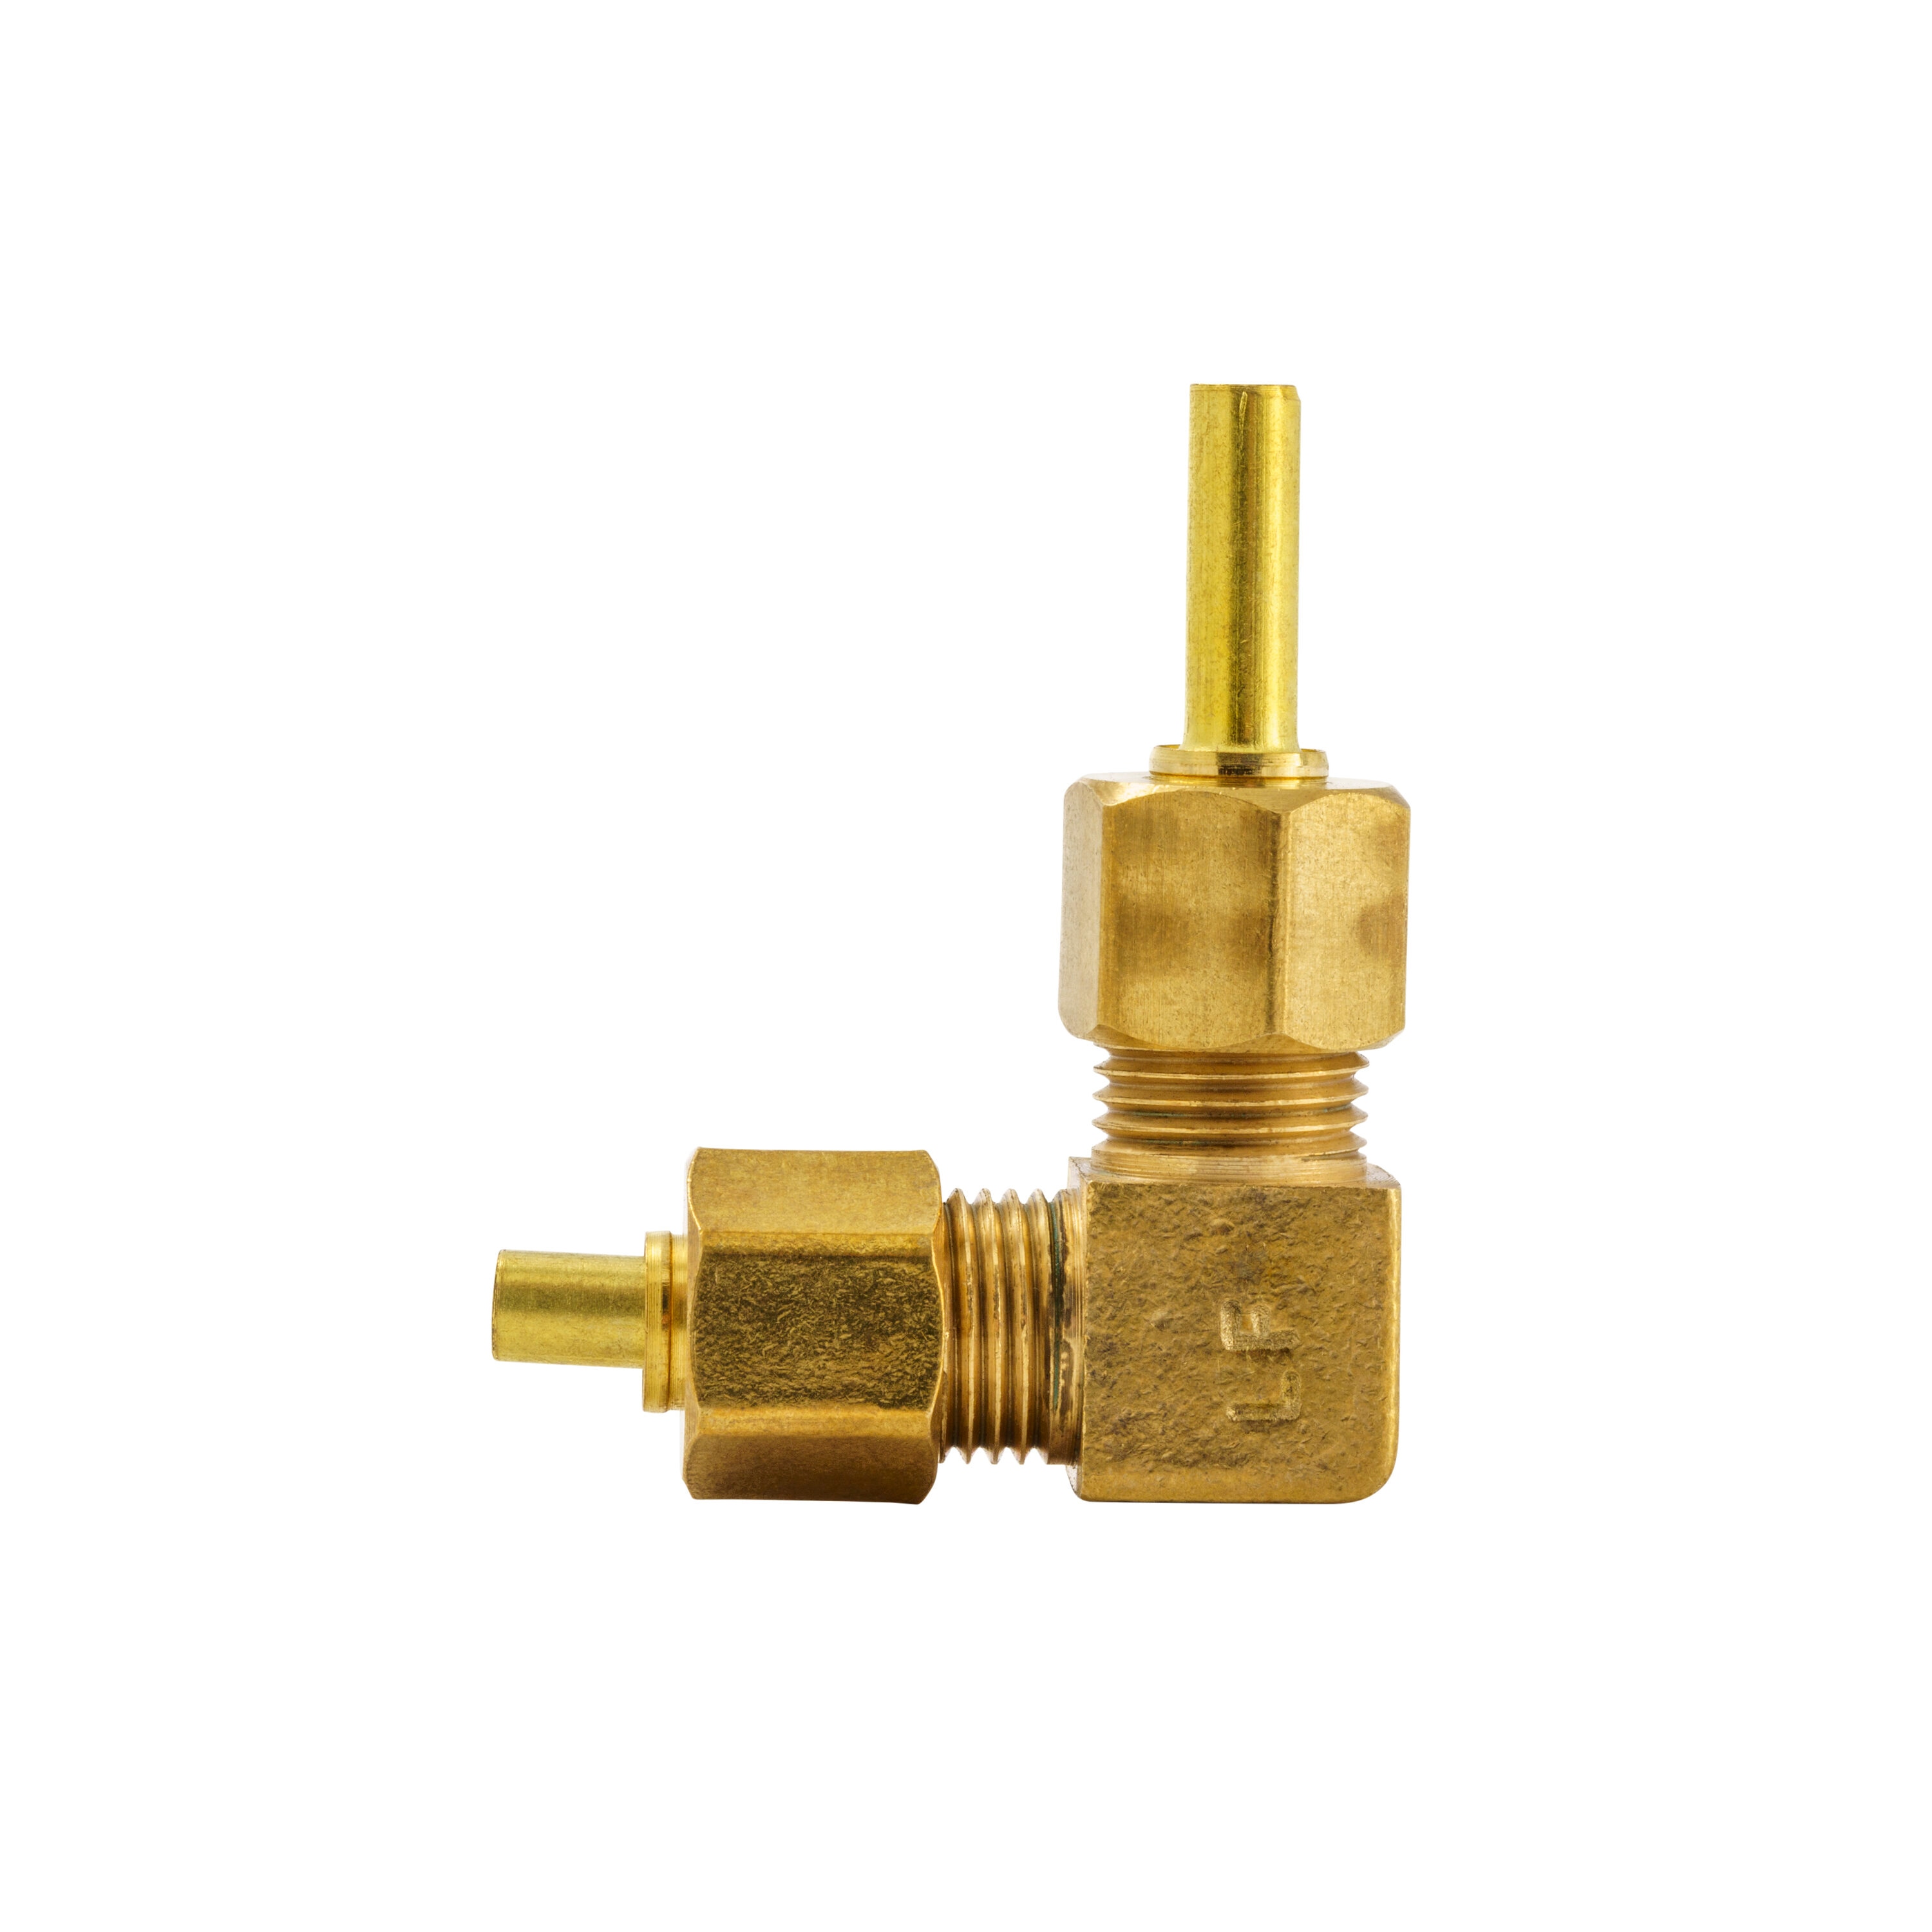 CTE Series - Union Elbow Compression - Brass Compression Fittings - Metal  Fittings